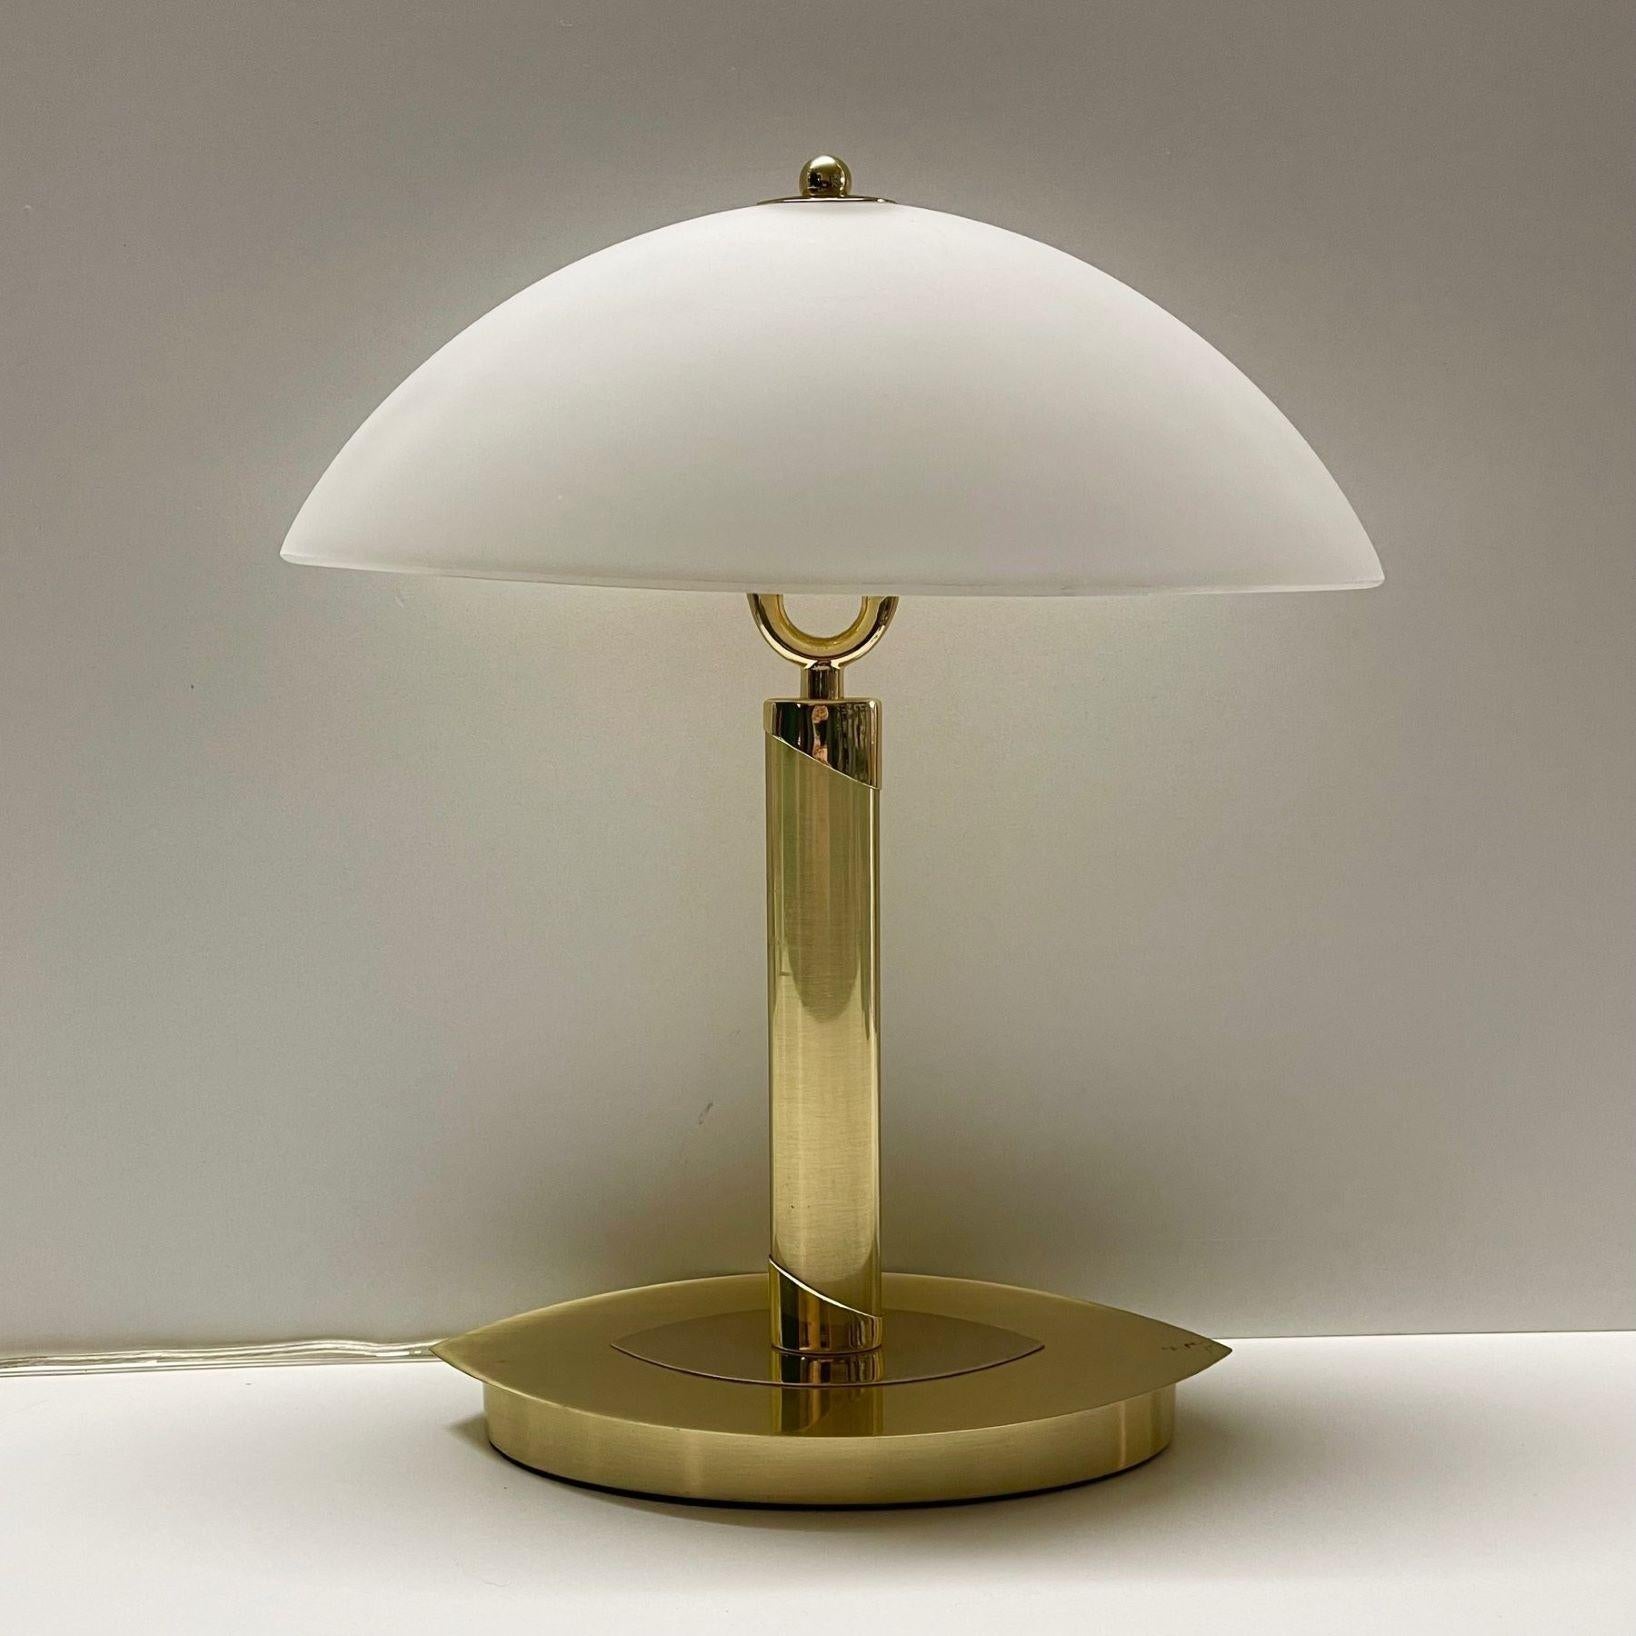 Bauhaus two-light bankers desk lamp or or table lamp, Germany, 1960s. These high quality table lamp is of chased brass with oval satin finish glass shade. This lamp is fully functional and in very good condition. It takes two E14 screw light bulbs,